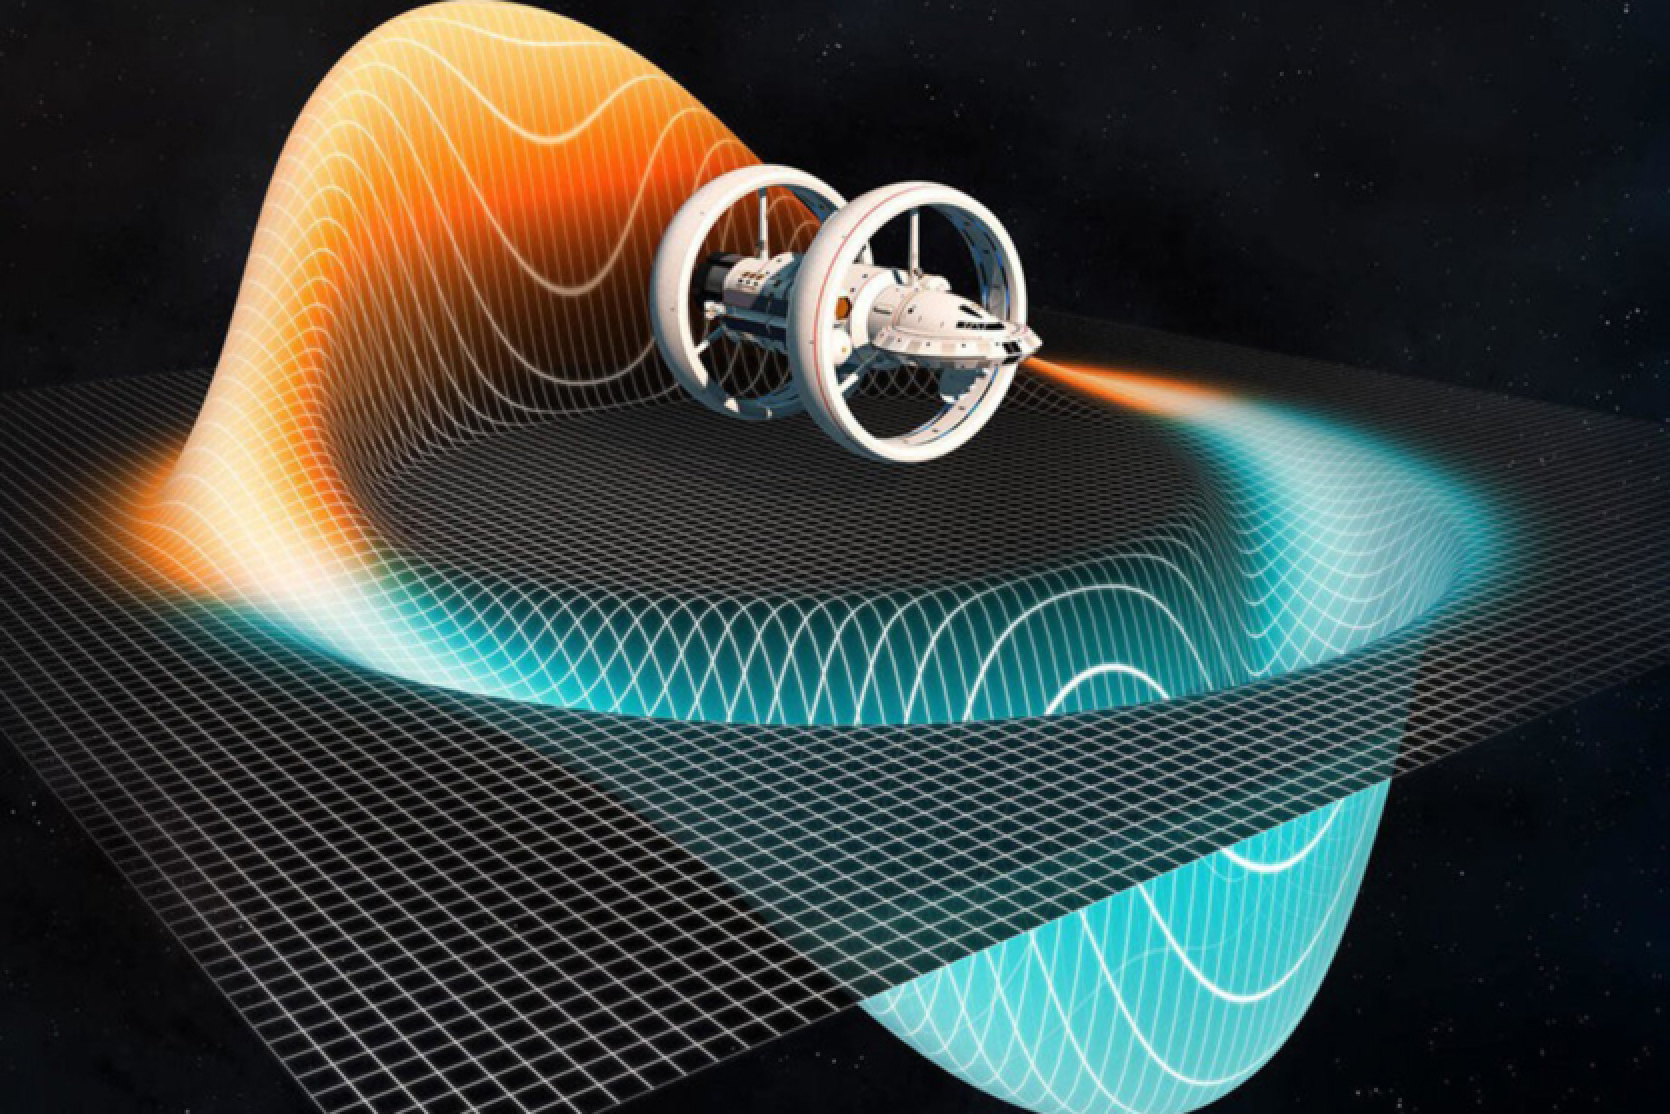 Warp drive gravitational waves could help detect highly advanced civilizations - scientists working on method